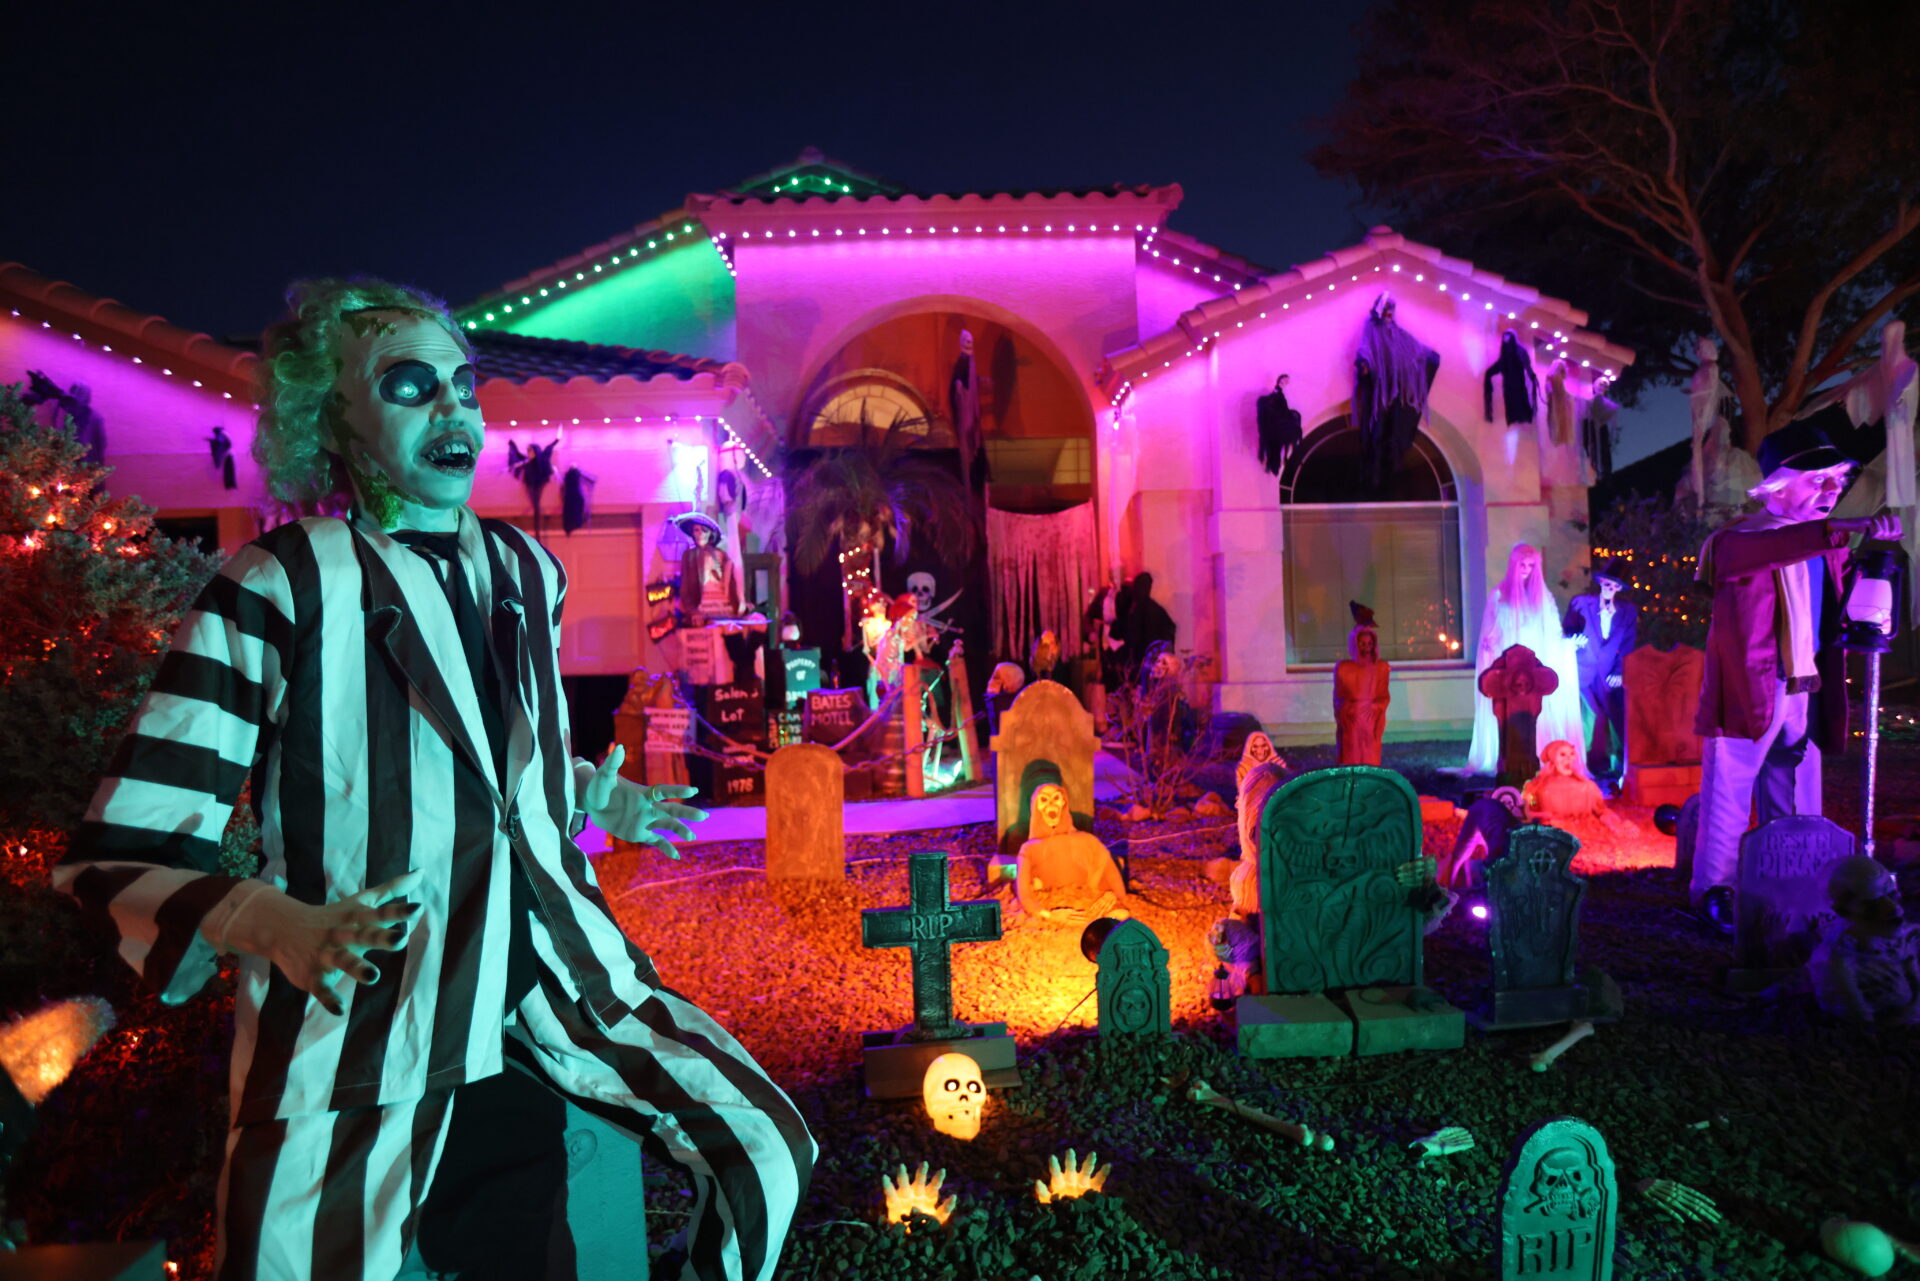 Boo! Check out the best of the Halloween decorations